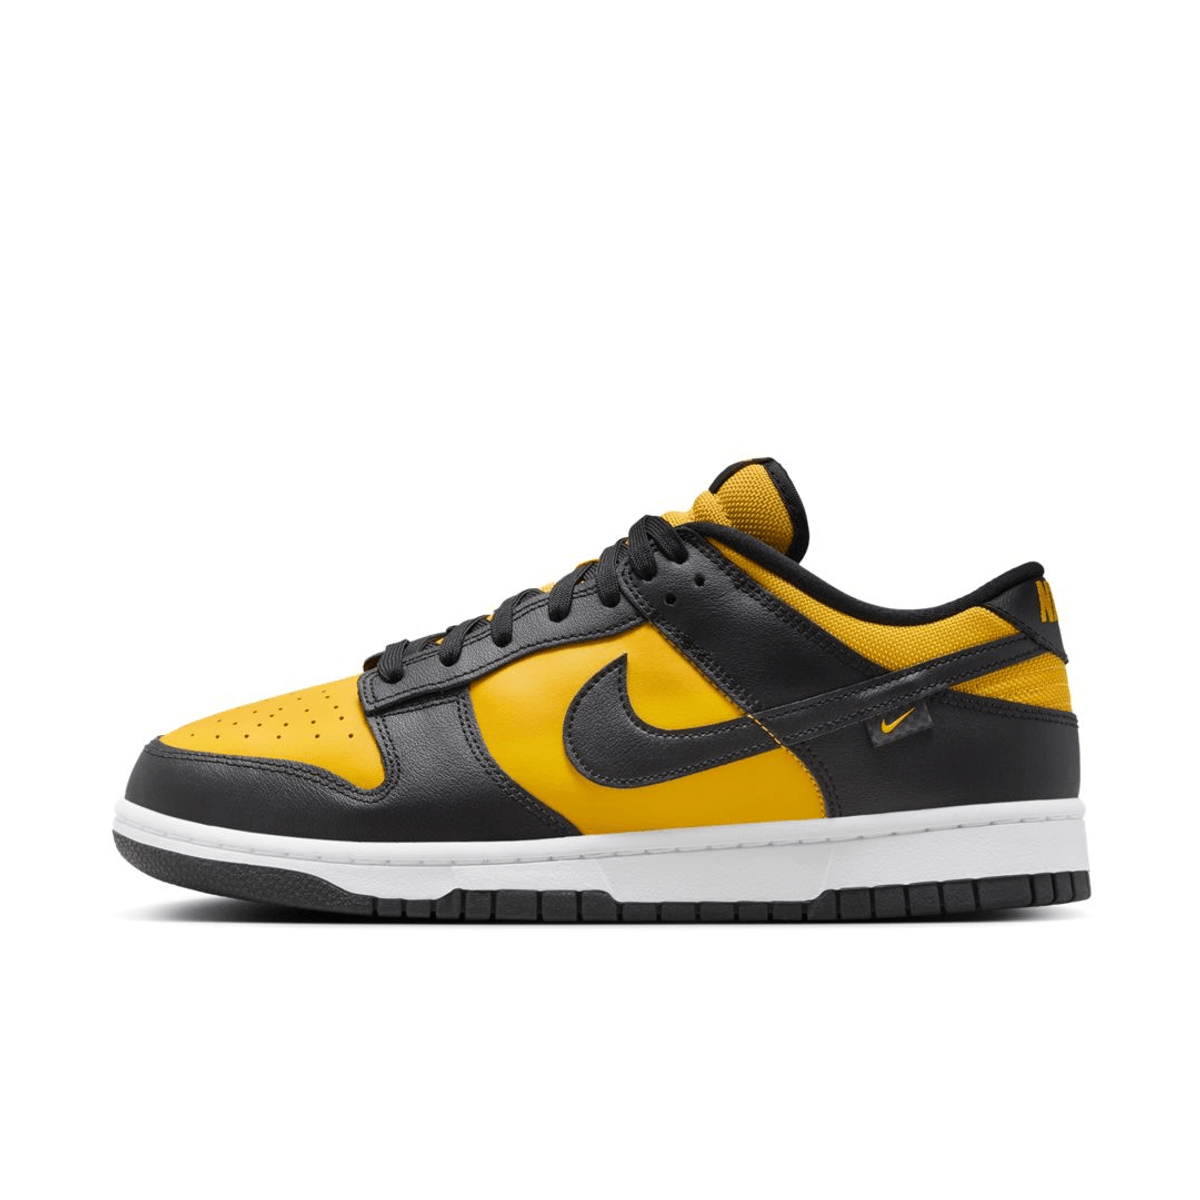 The Nike Dunk Low Arrives In "Black/University Gold"